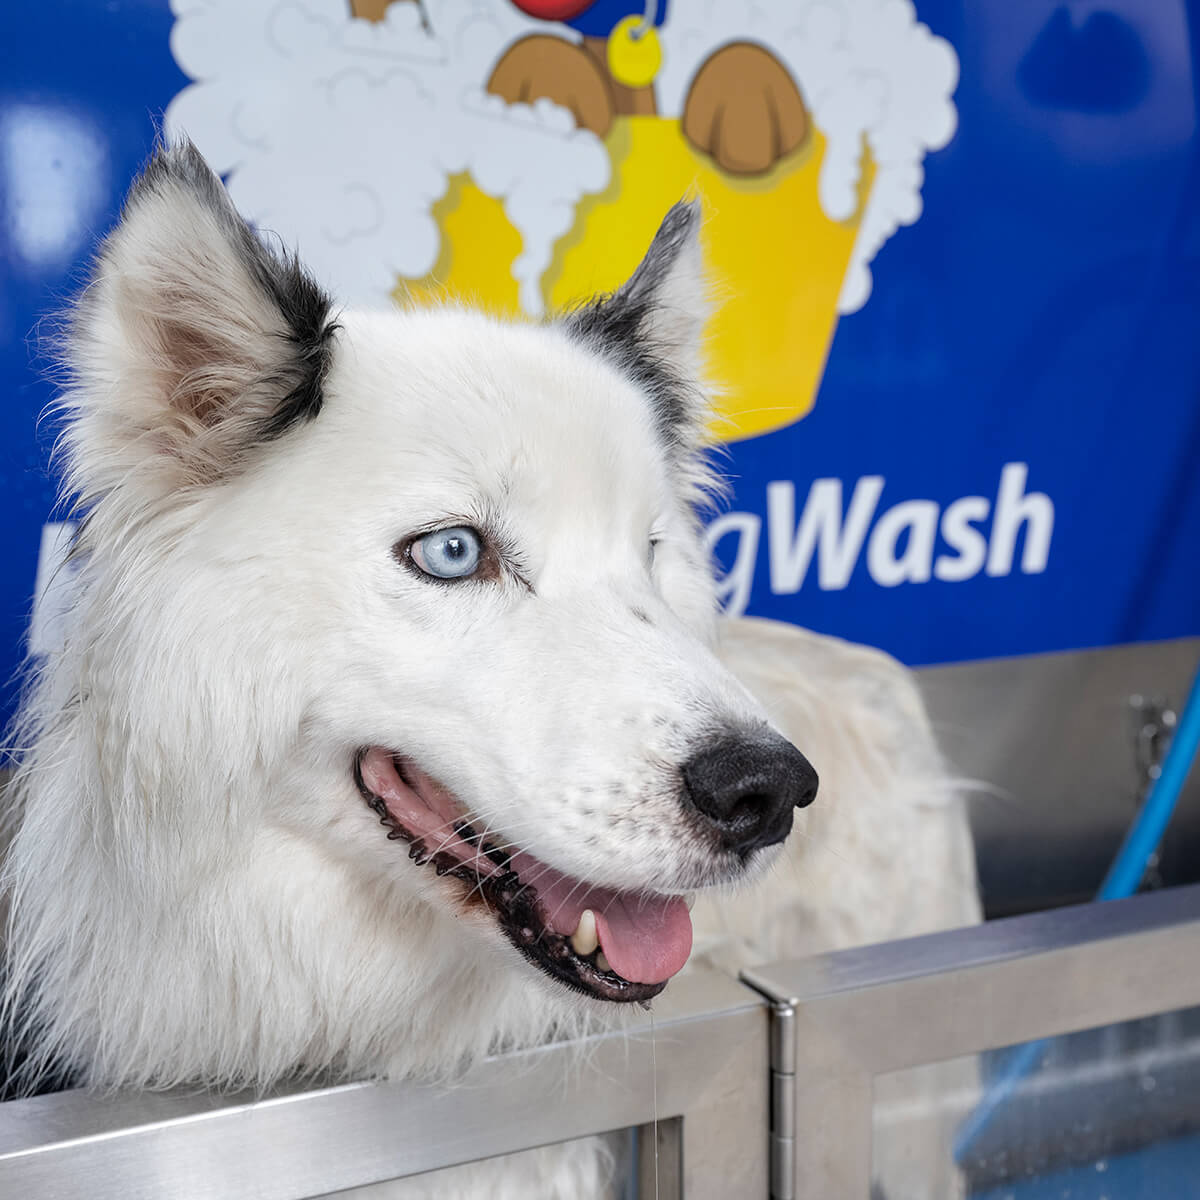 HappyDogWash - wash, dry and pamper your pooch in a fun friendly environment